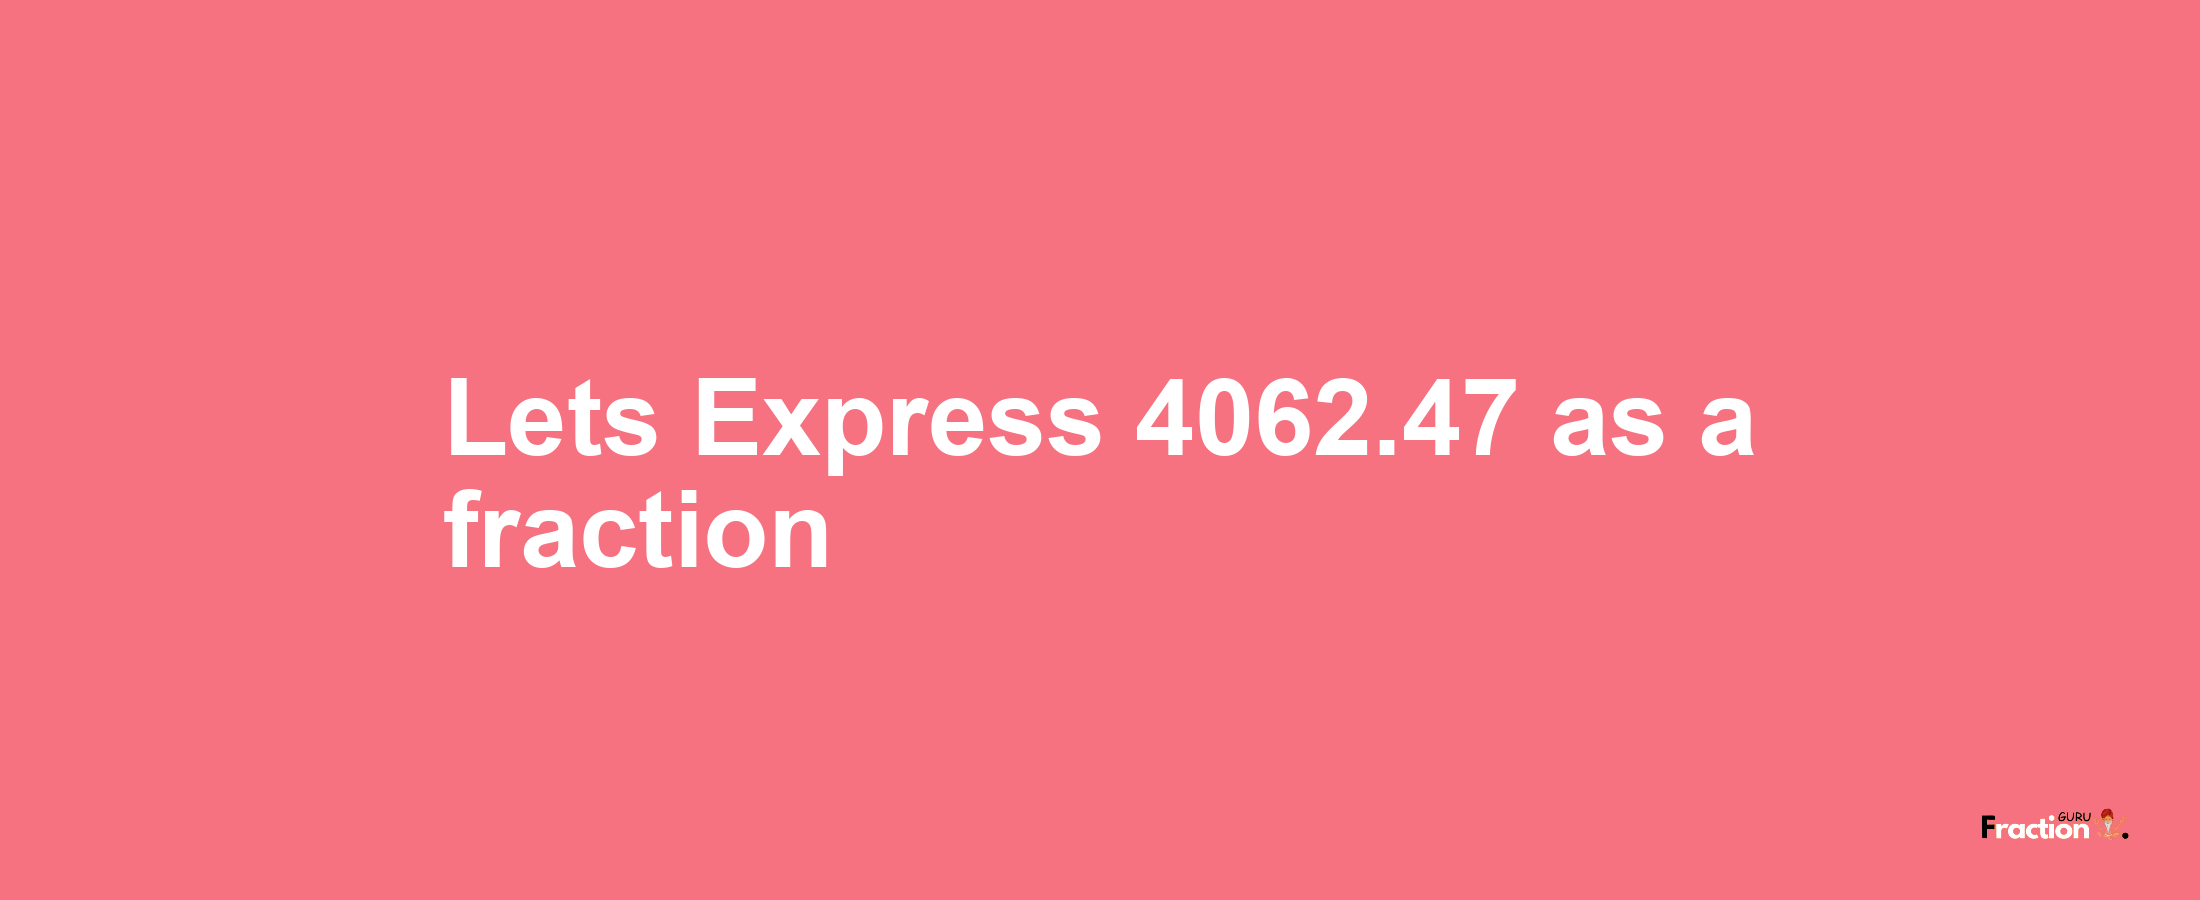 Lets Express 4062.47 as afraction